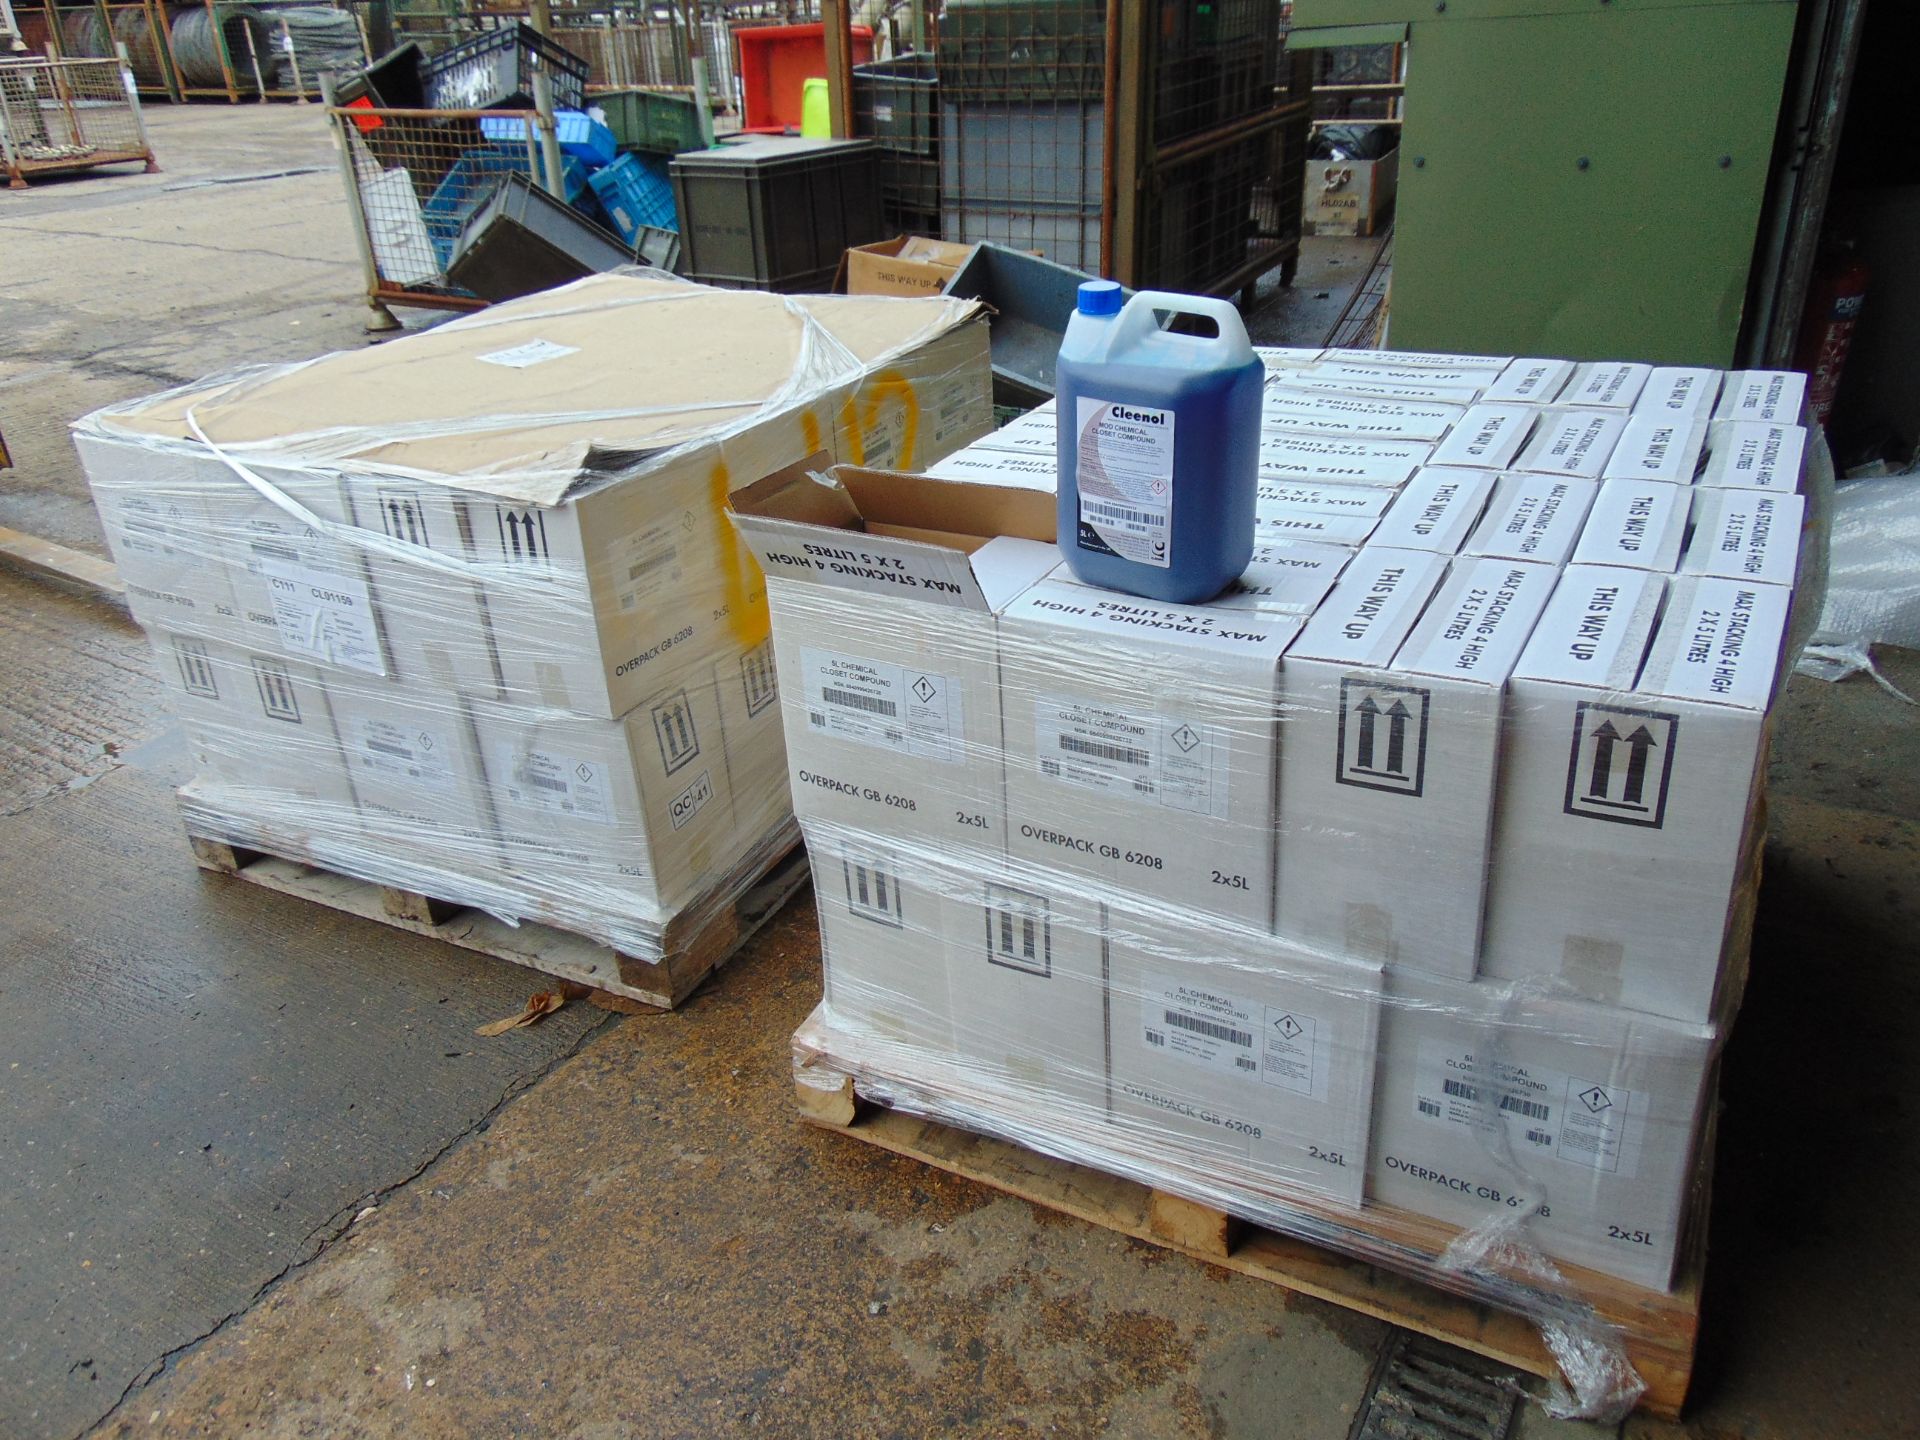 160 x (5 Litre Cans 2 Pallets Cleenol Chemical Toilet Compound, New Unissued MoD Reserve Stocks